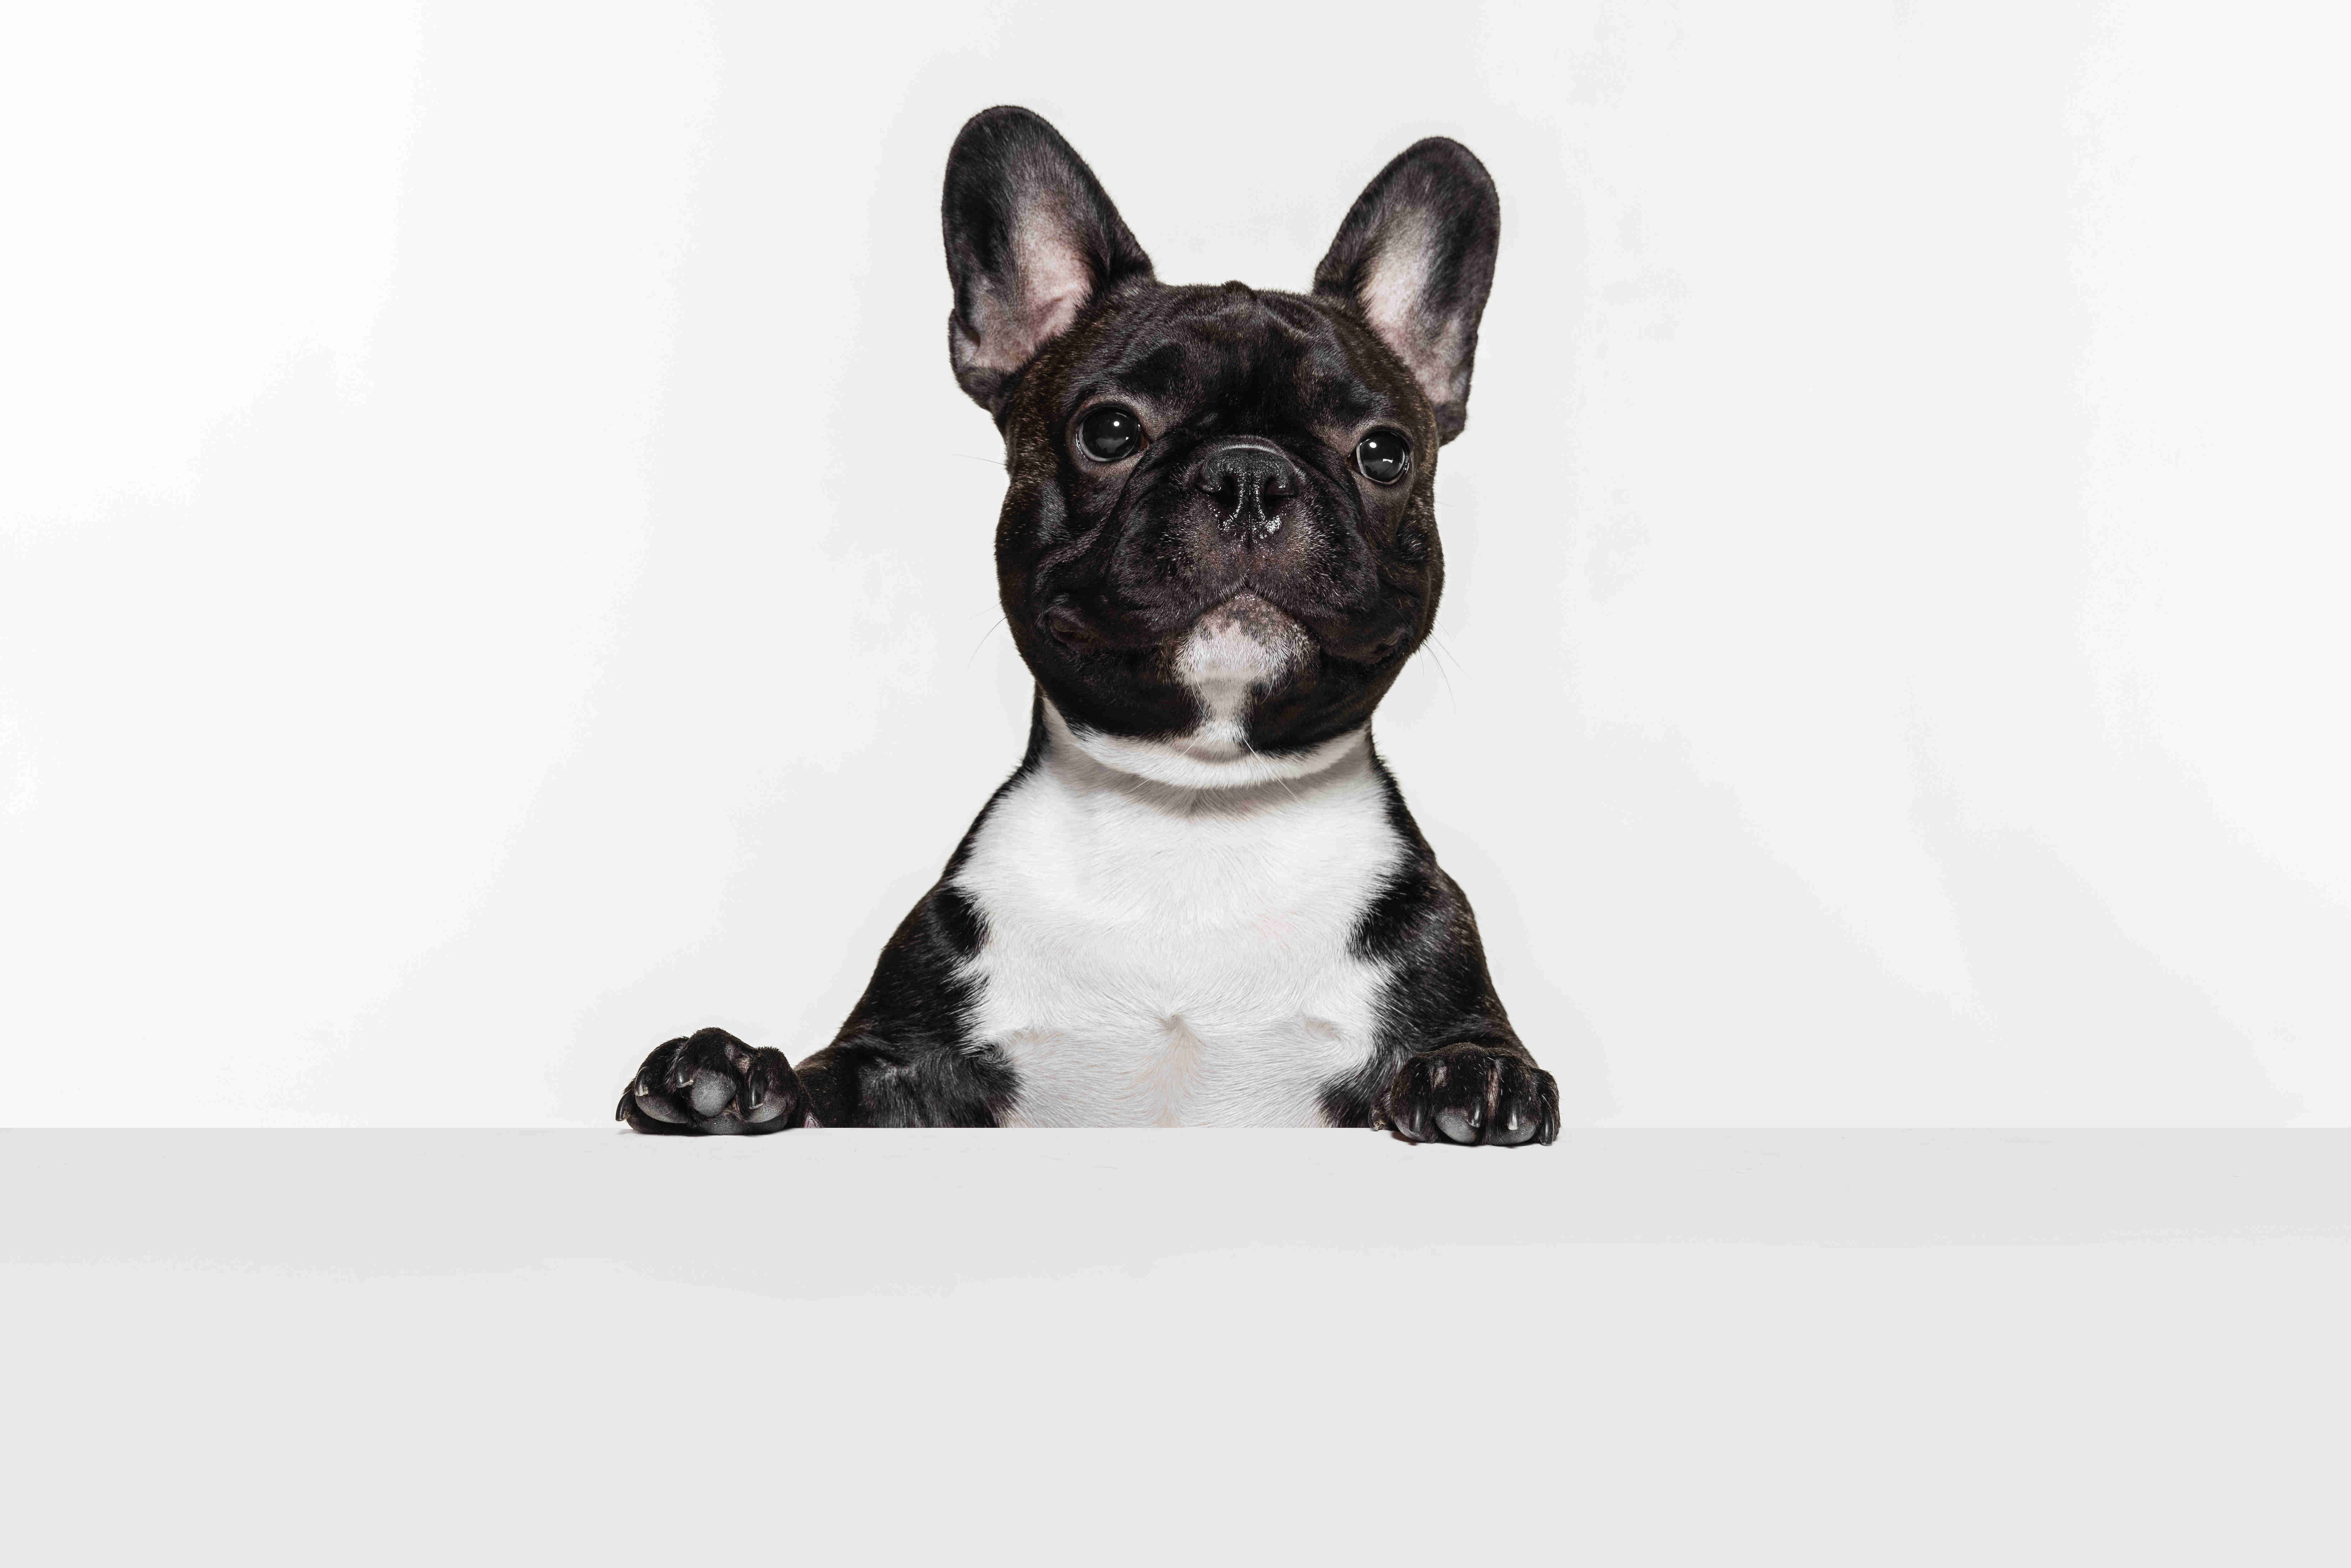 5 Expert Tips to Help Your French Bulldog Adjust to Wearing a Muzzle and Other Safety Equipment